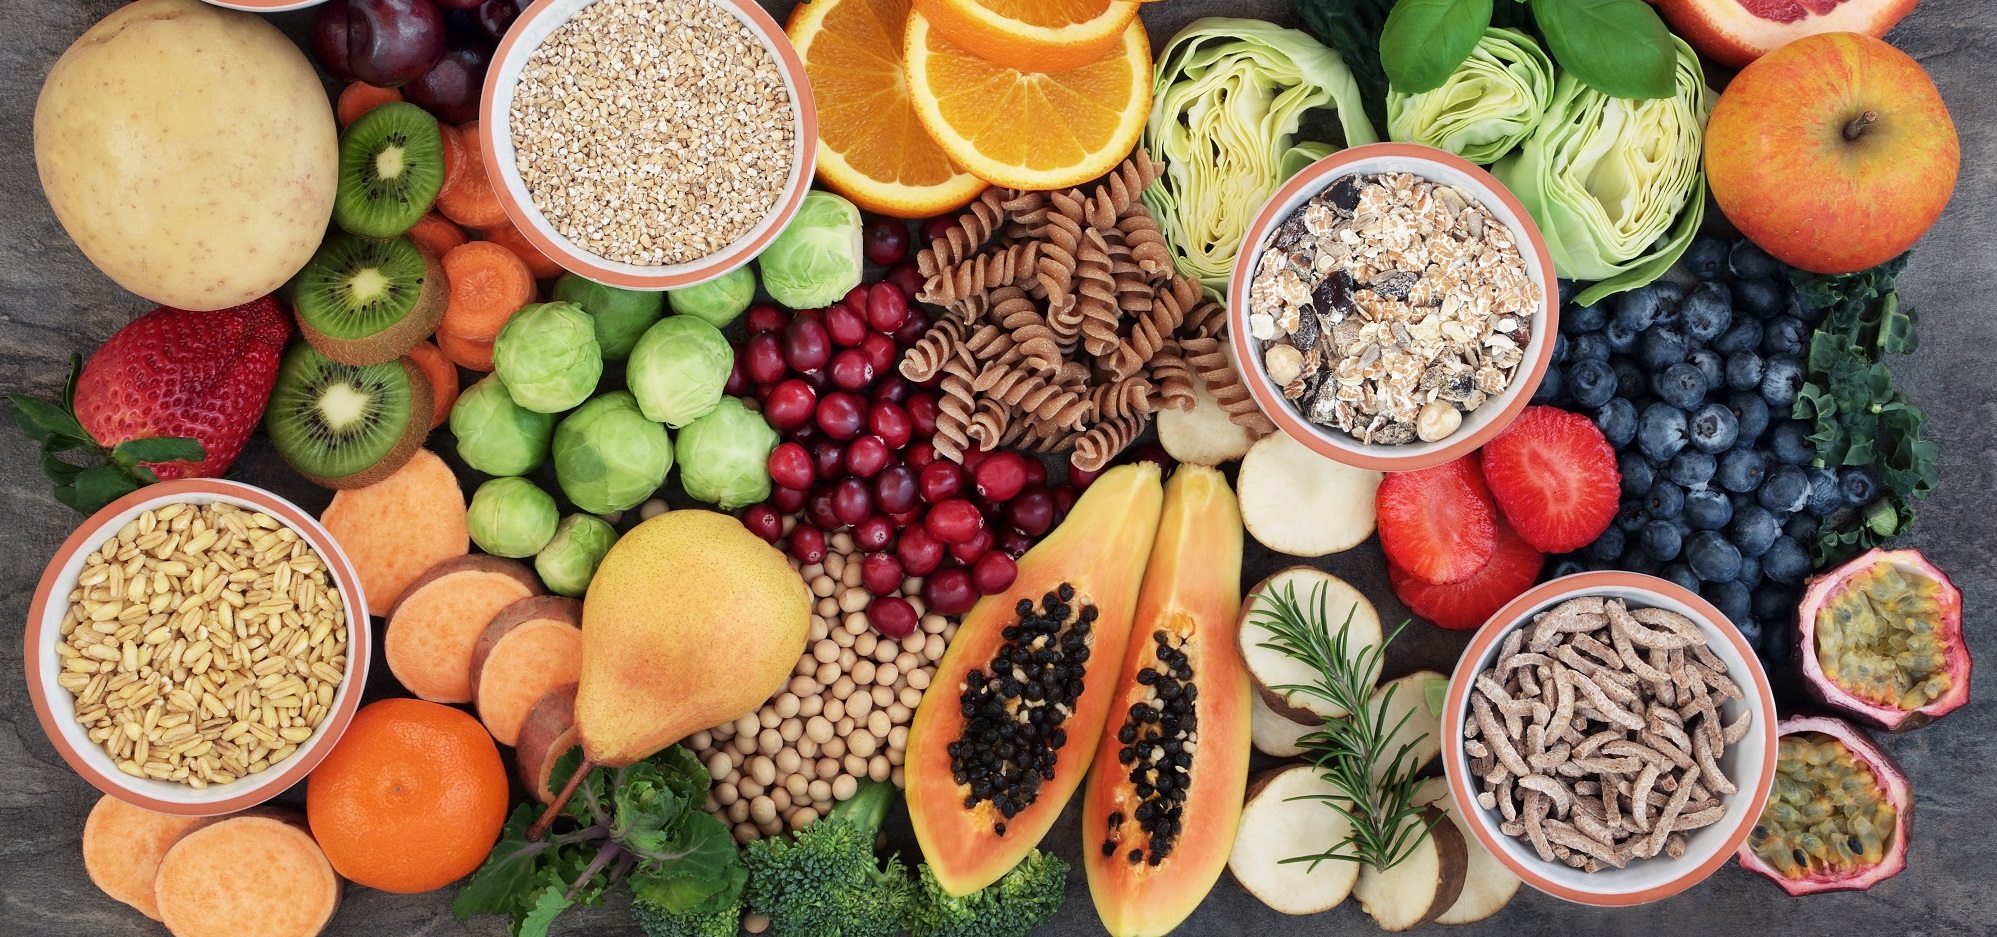 Image of various healthy food with High Fiber Content